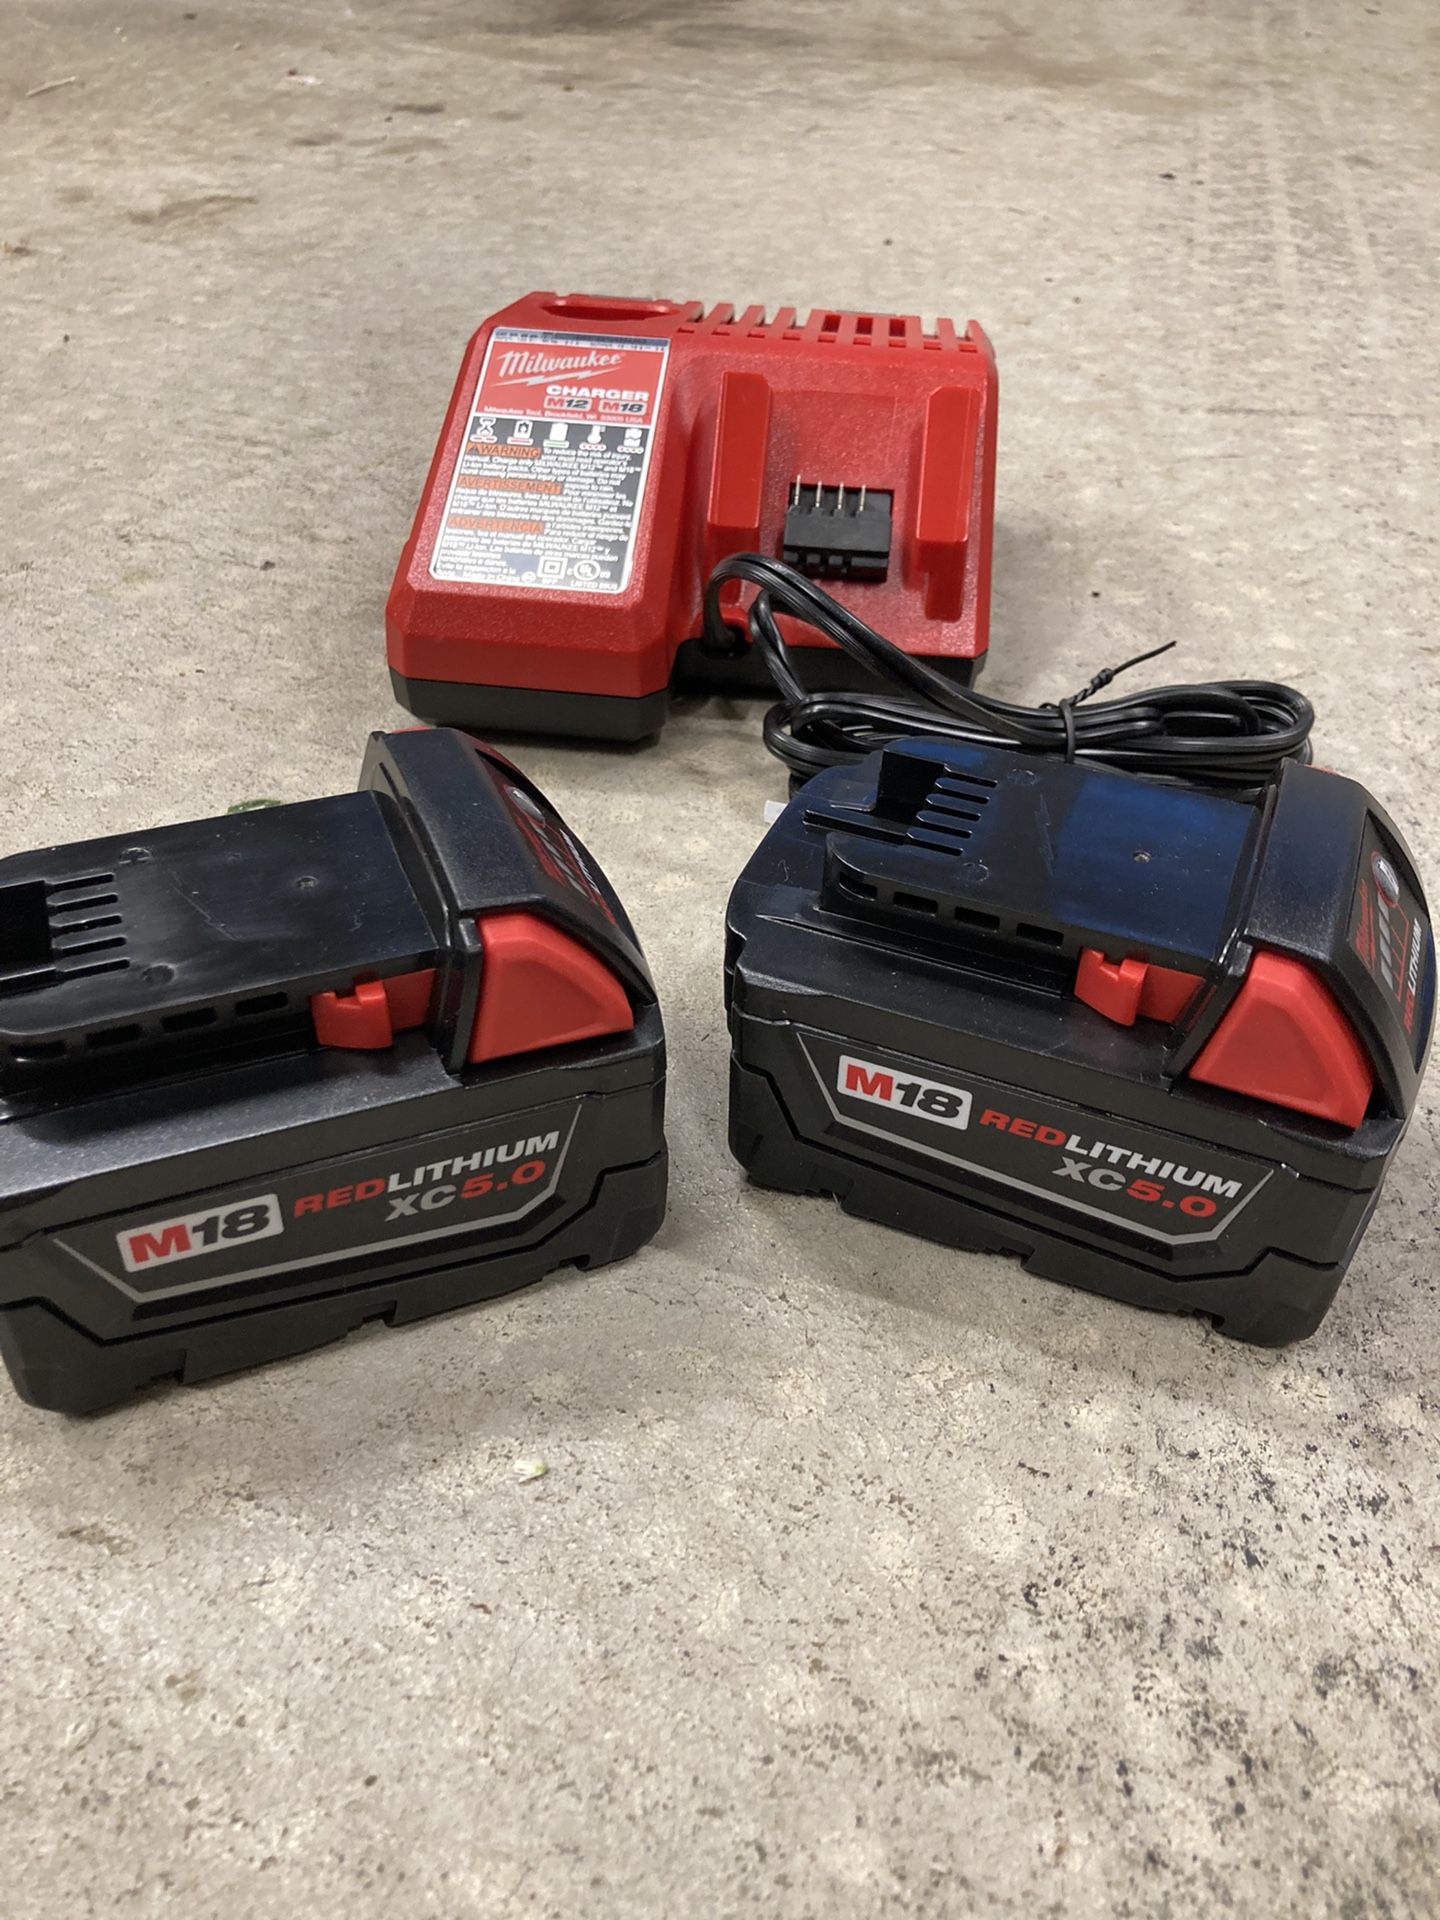 2 New Milwaukee M18 5.0 AH Batteries & Charger 